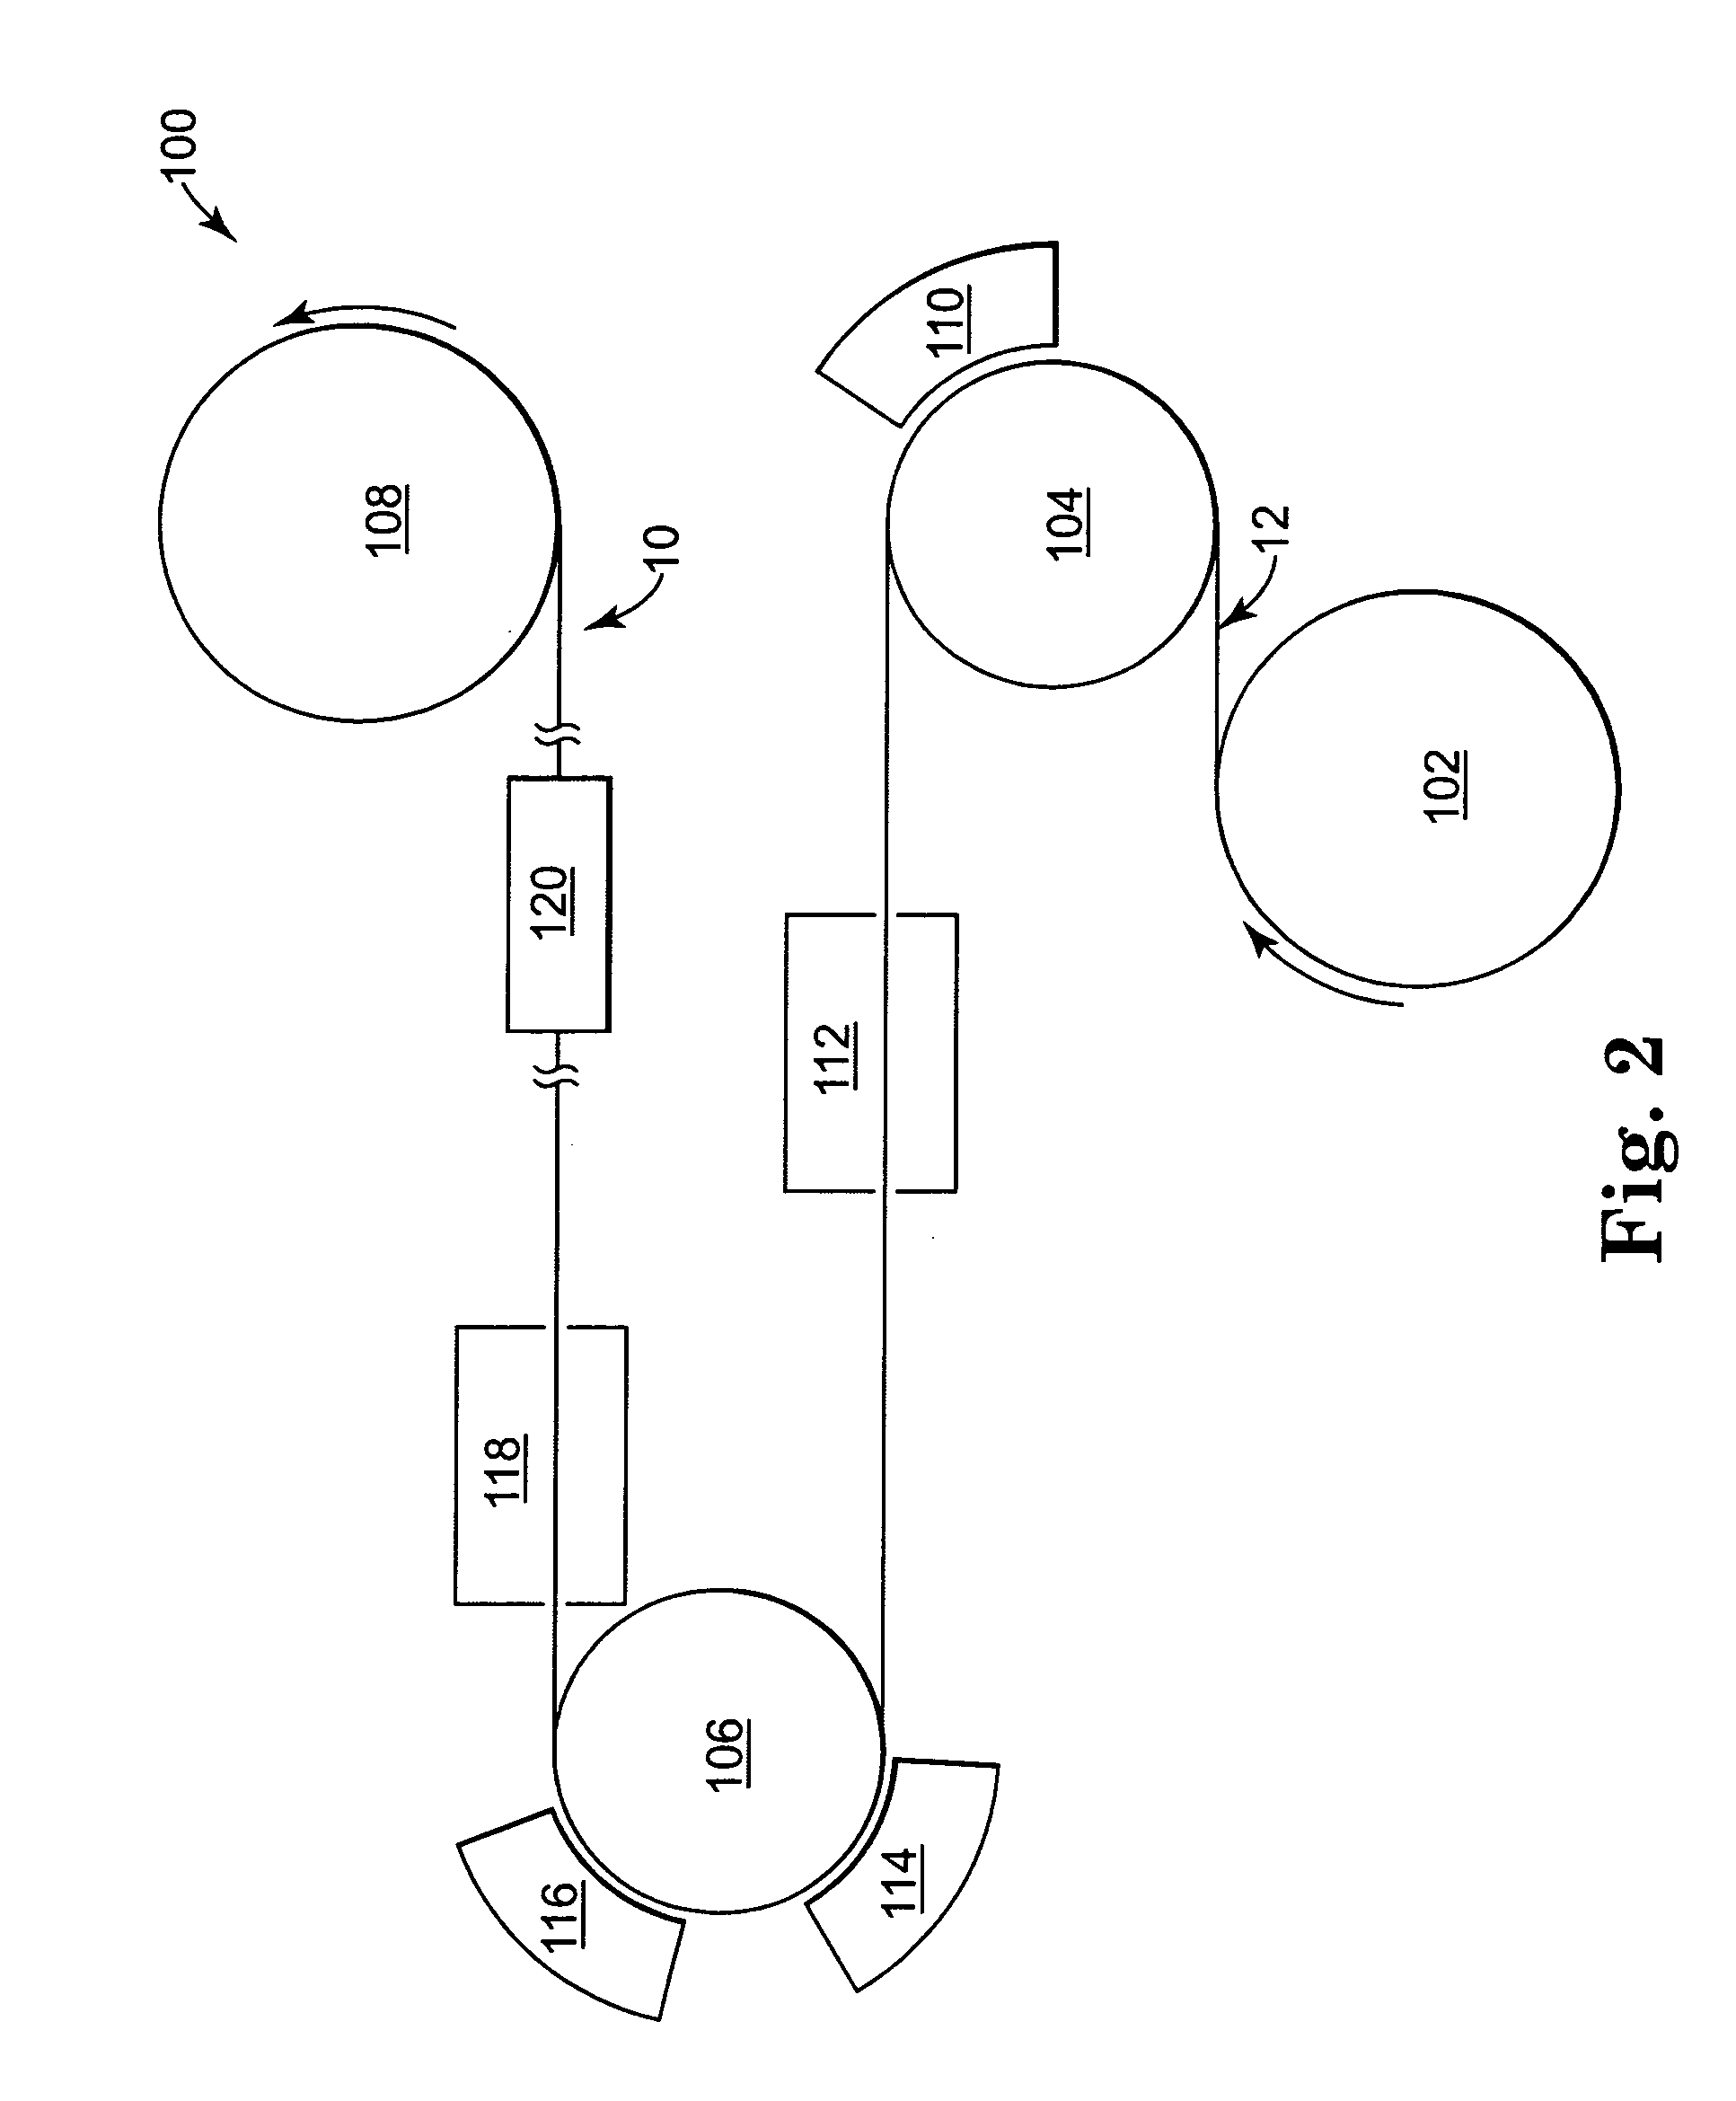 Magnetic recording medium with dual magnetic sides and having a low resistivity